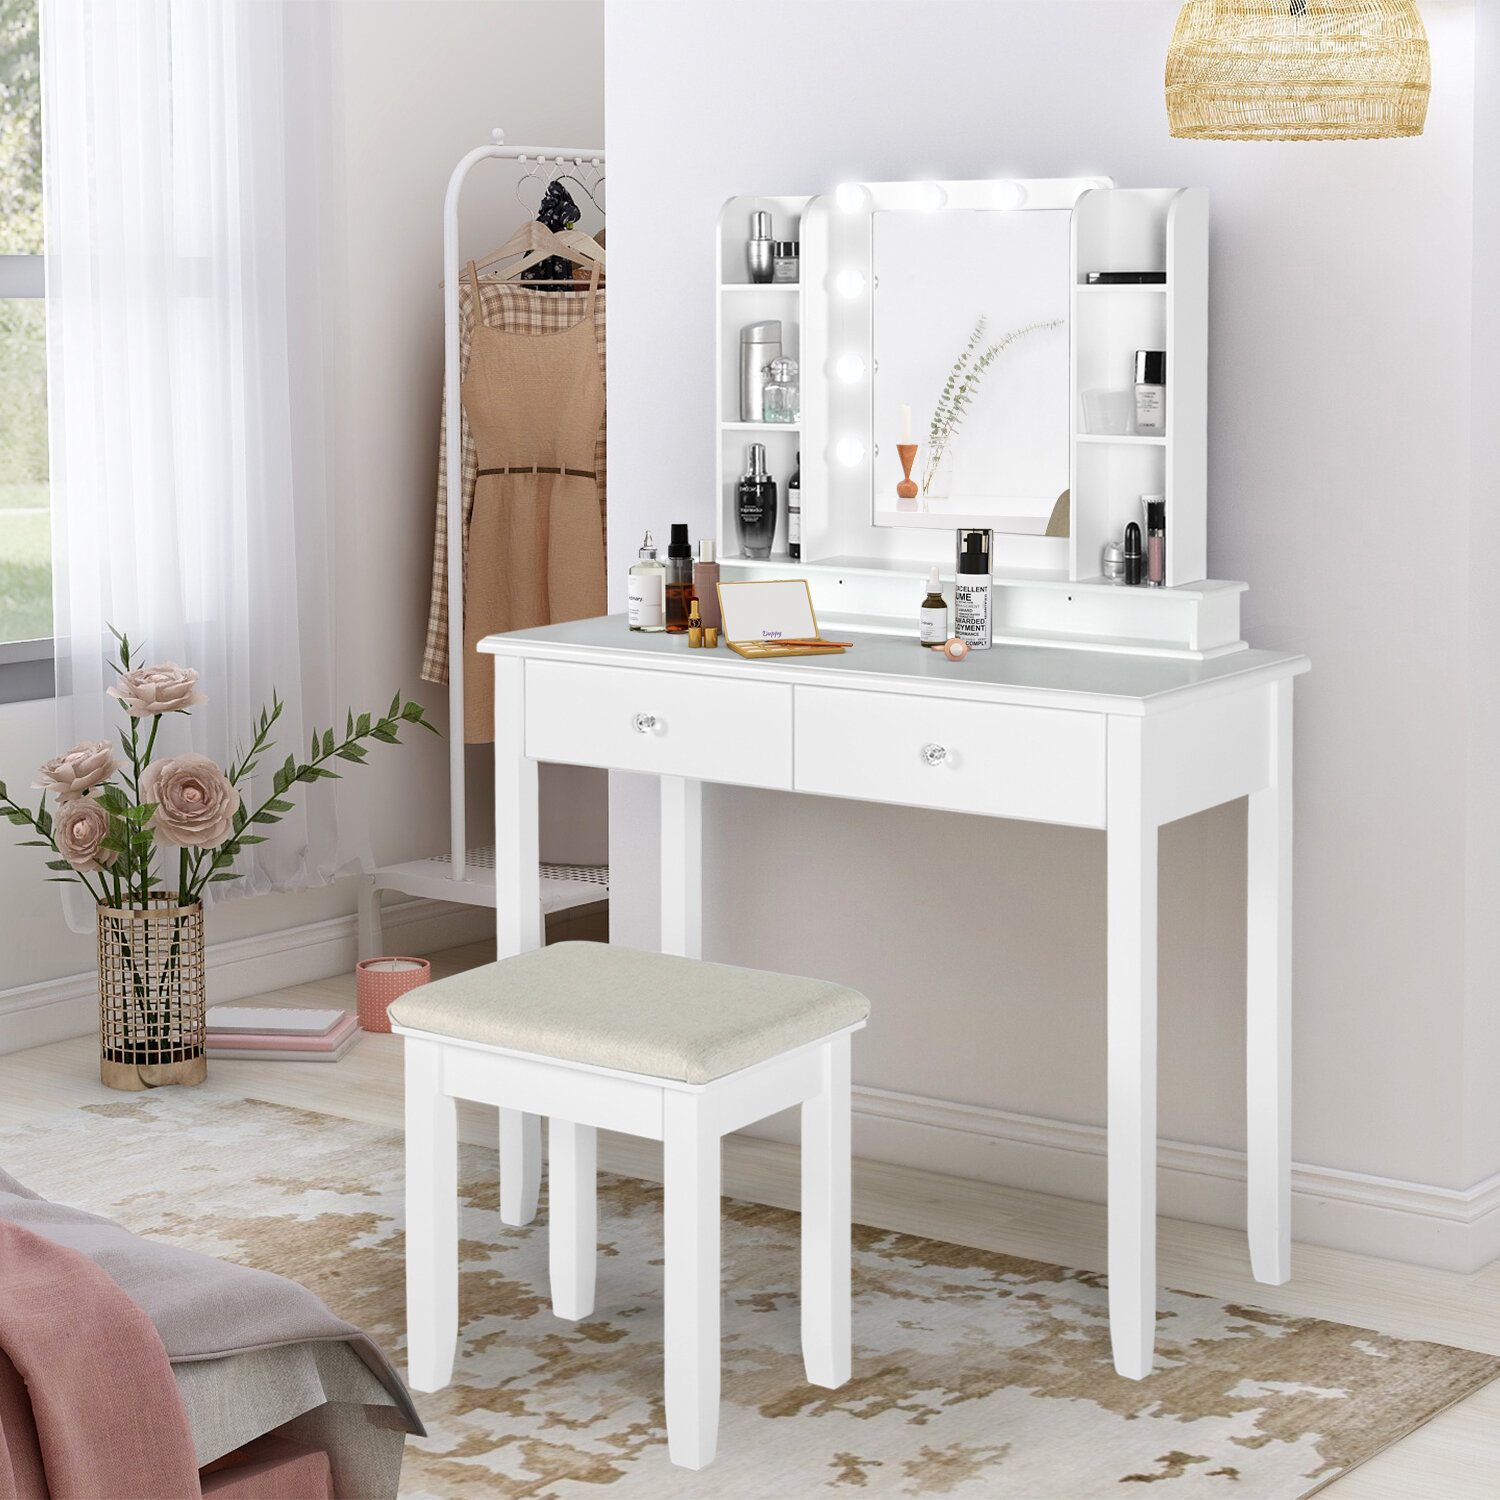 Millwood Pines Makeup Vanity Dressing Table with LED Light